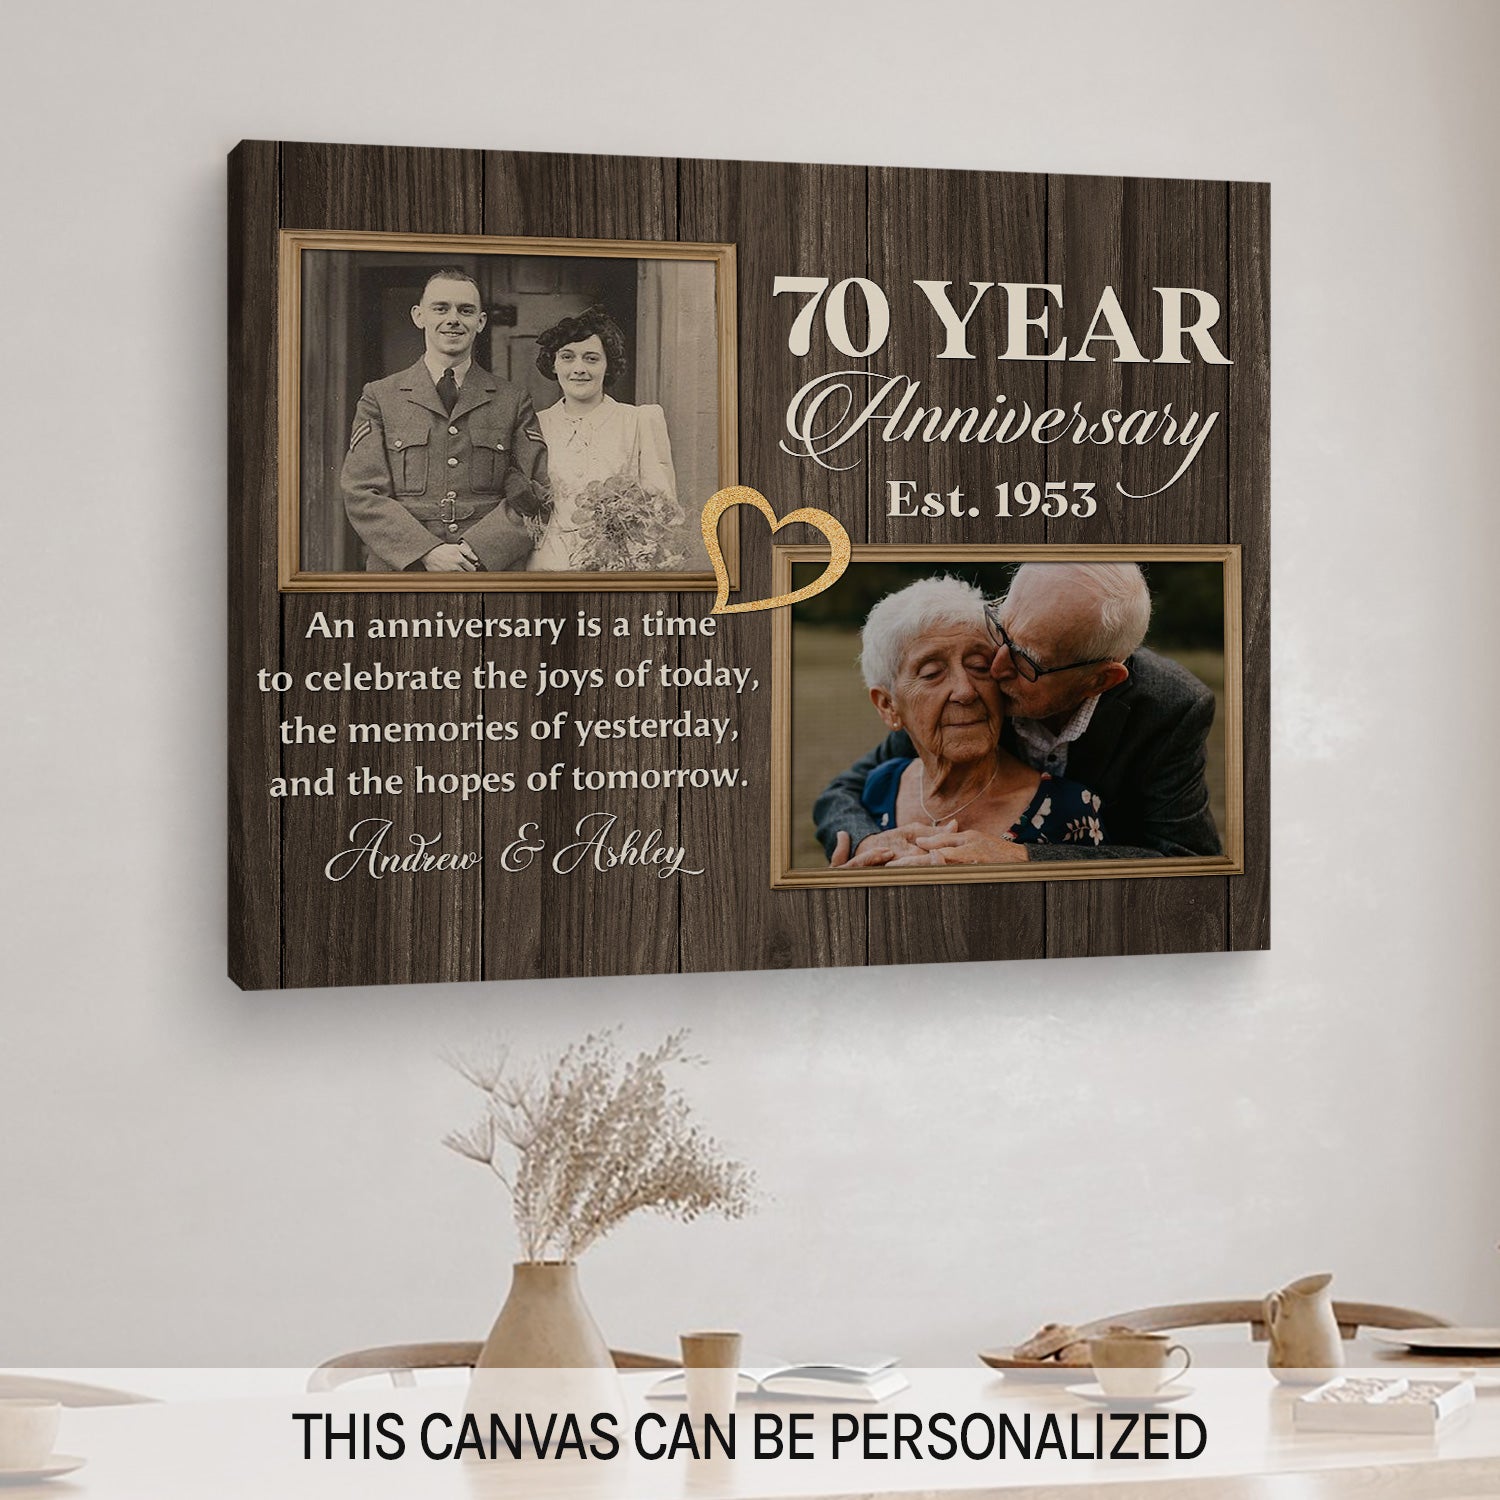 70 Year Anniversary - Personalized 70 Year Anniversary gift for Parents, Husband or Wife - Custom Canvas Print - MyMindfulGifts